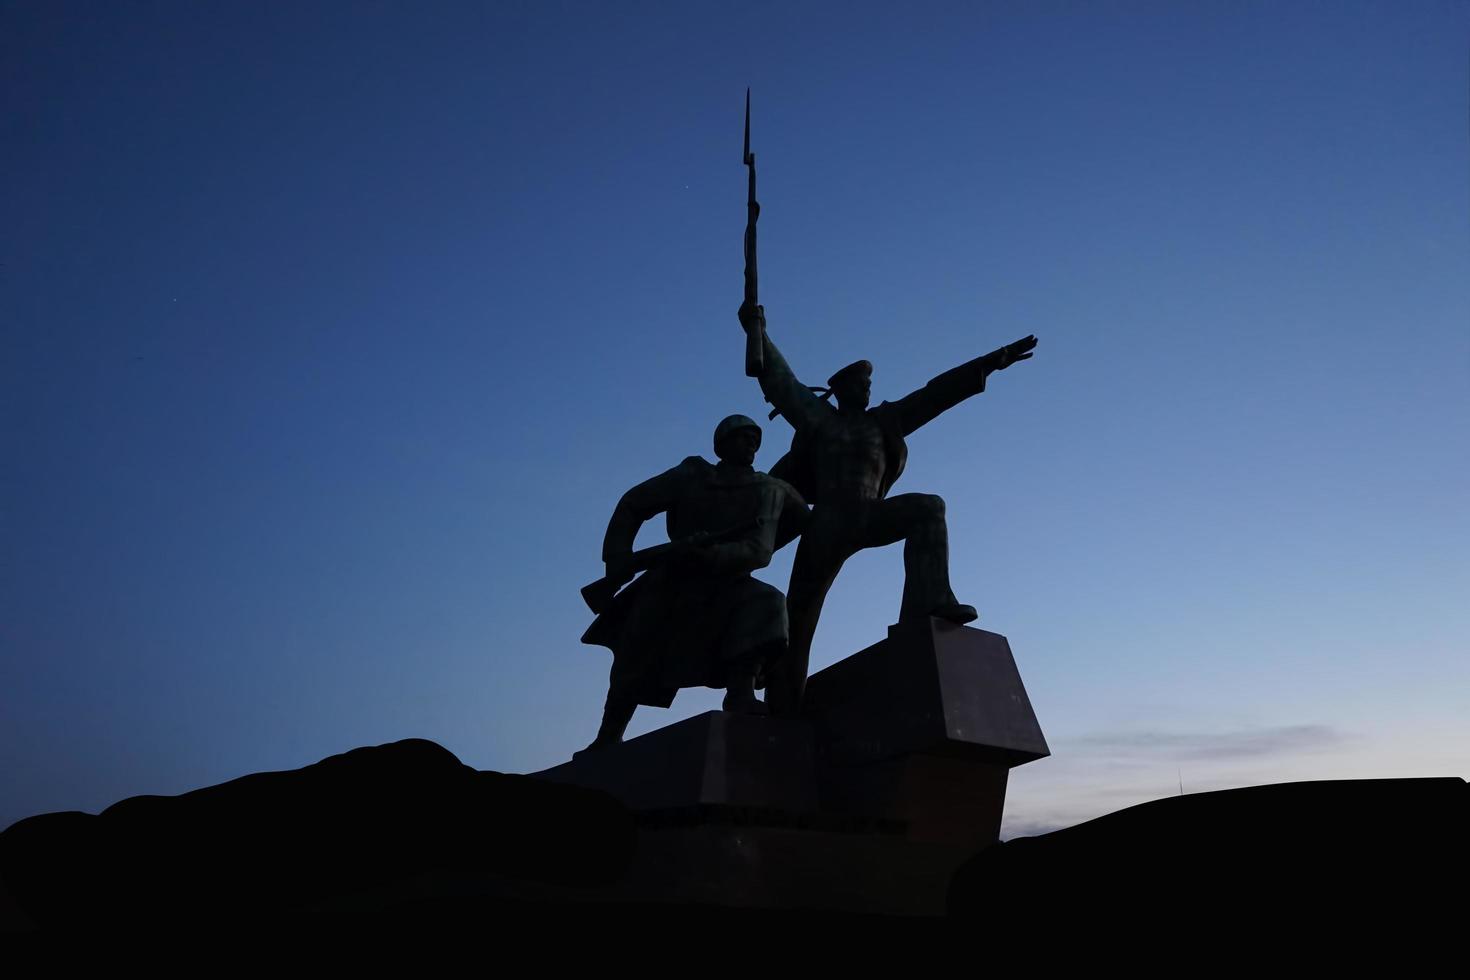 Sevastopol, Crimea-March 16, 2015 -Monument to soldier and sailor on the background of the evening sky photo